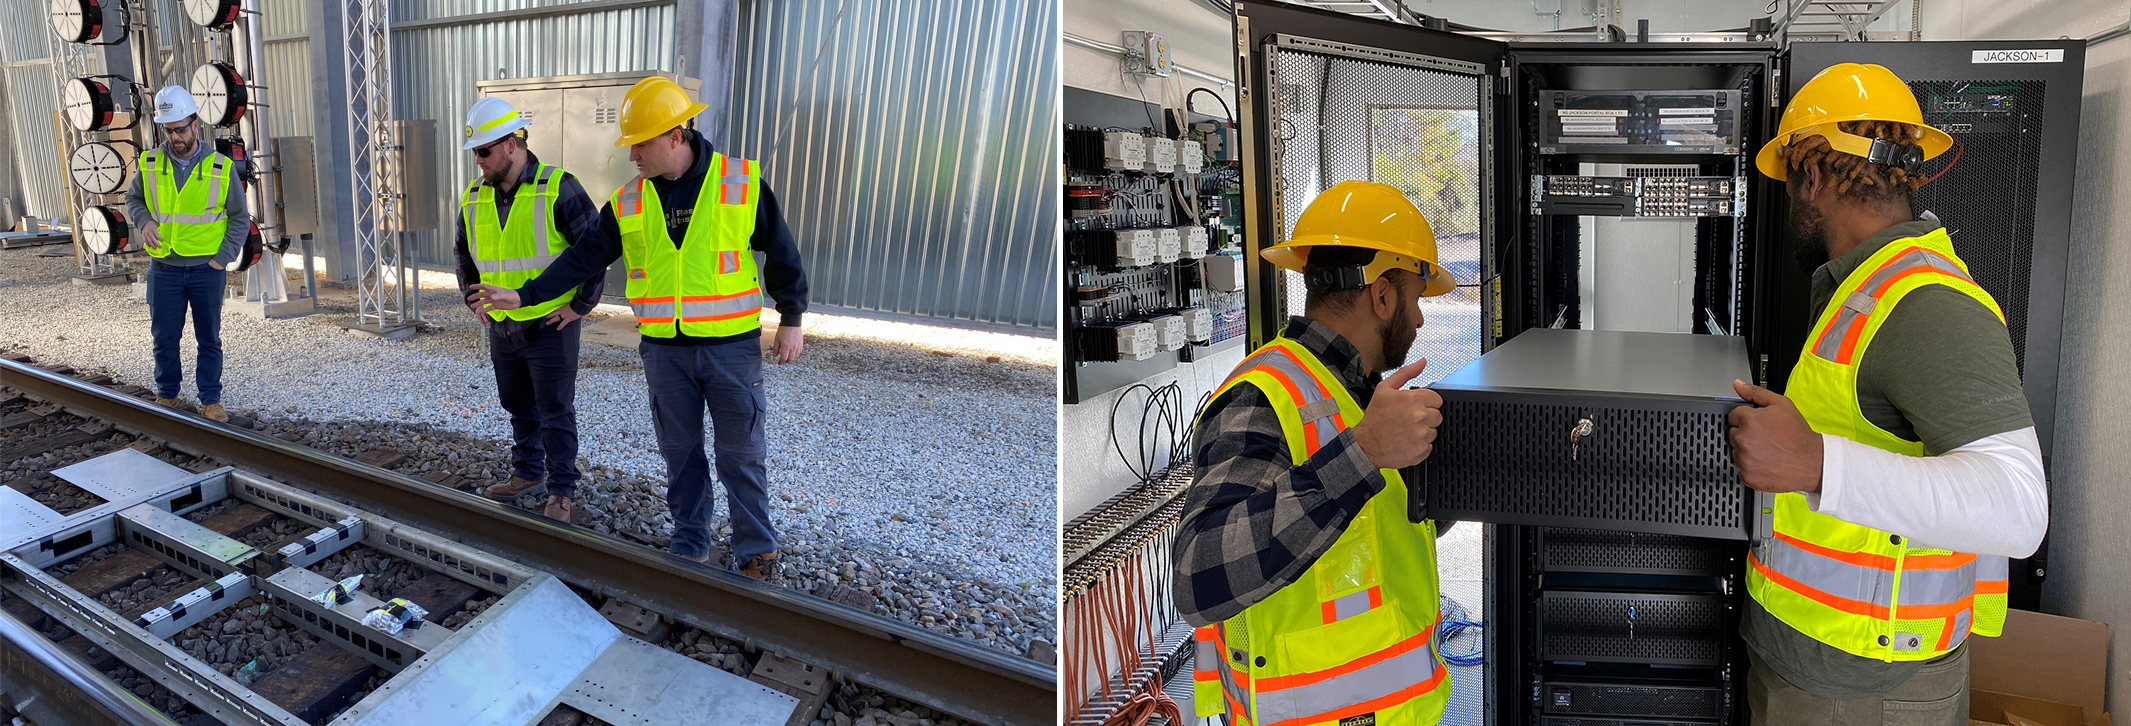 Two photos, both with workers in hard hats and safety vests working within the train portal.